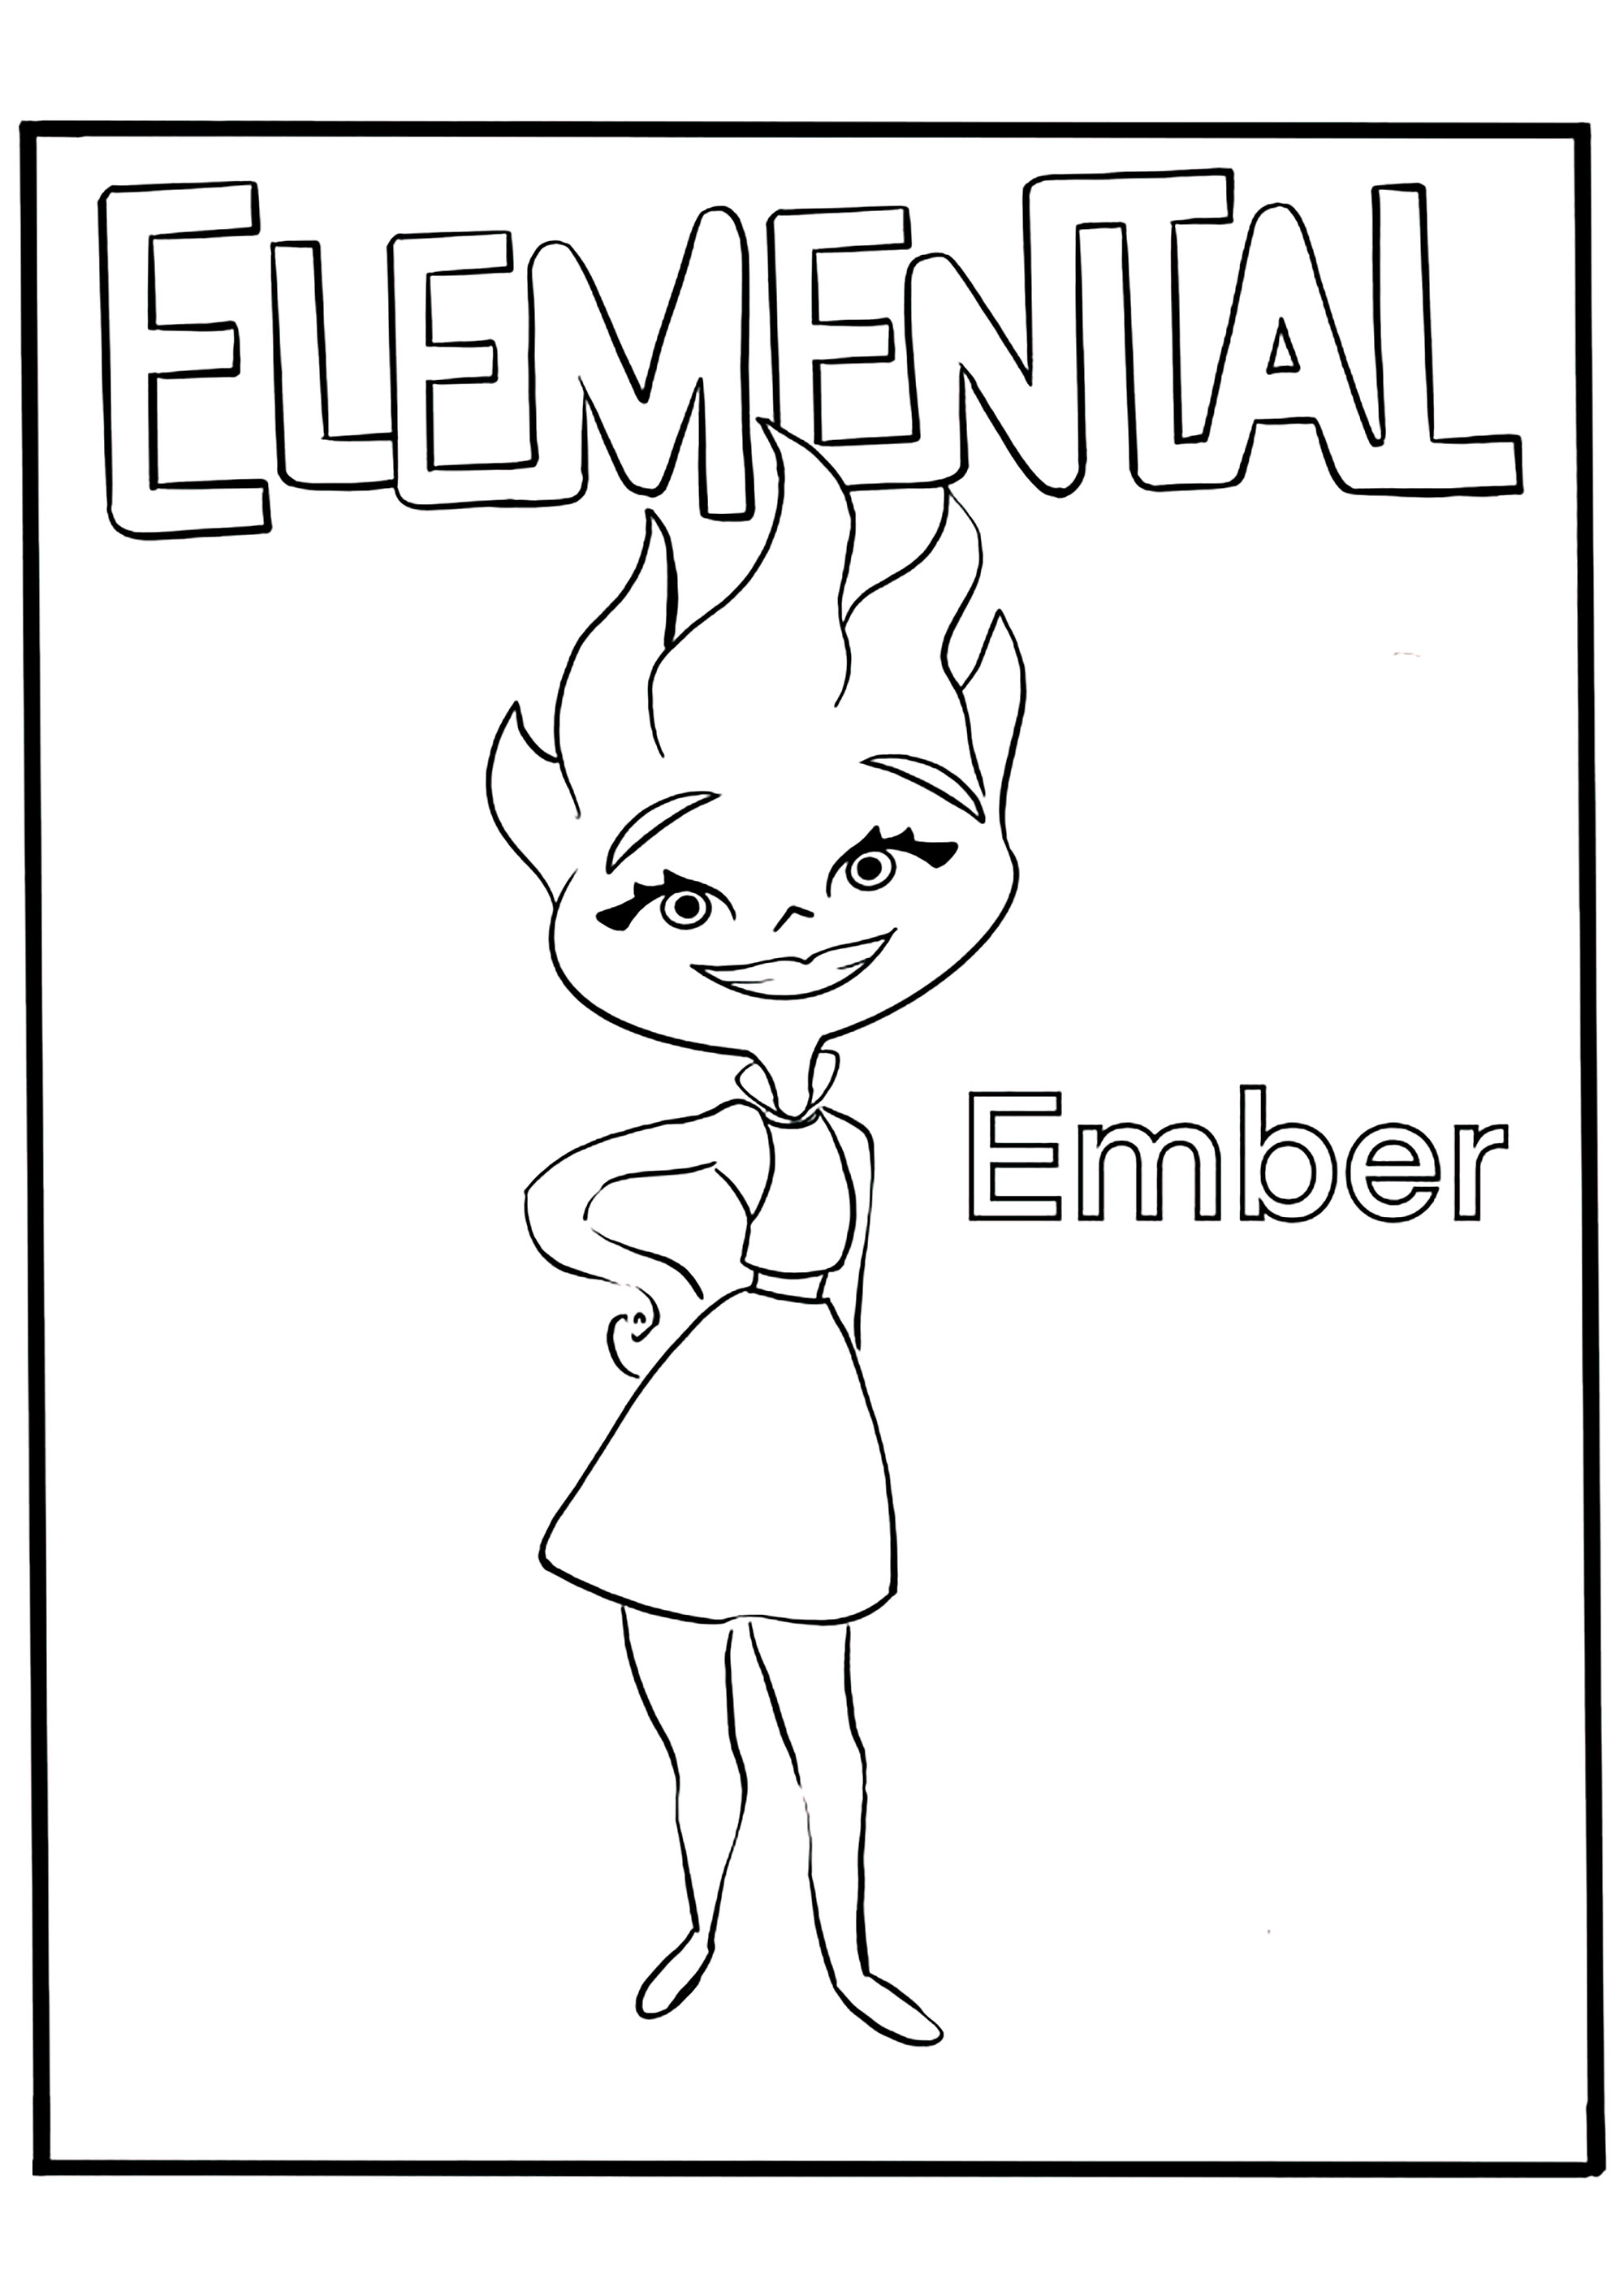 Ember, or fire